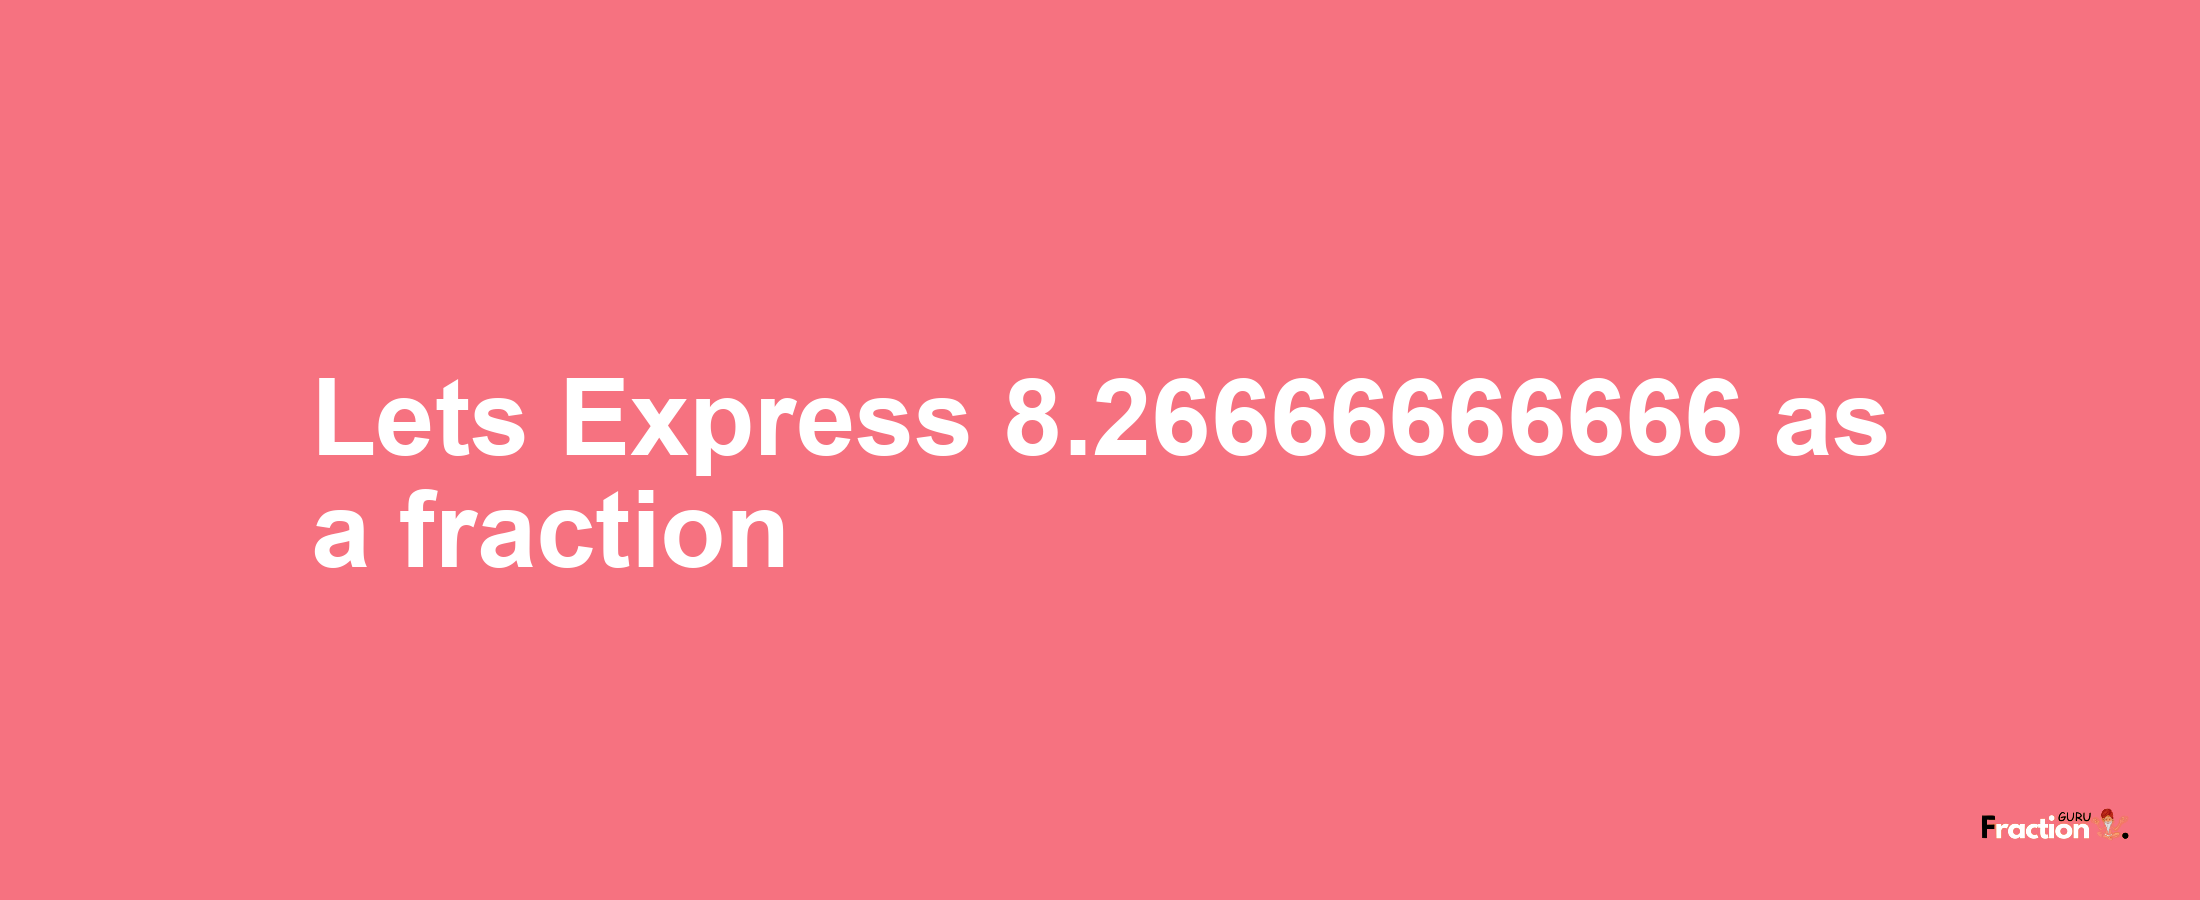 Lets Express 8.26666666666 as afraction